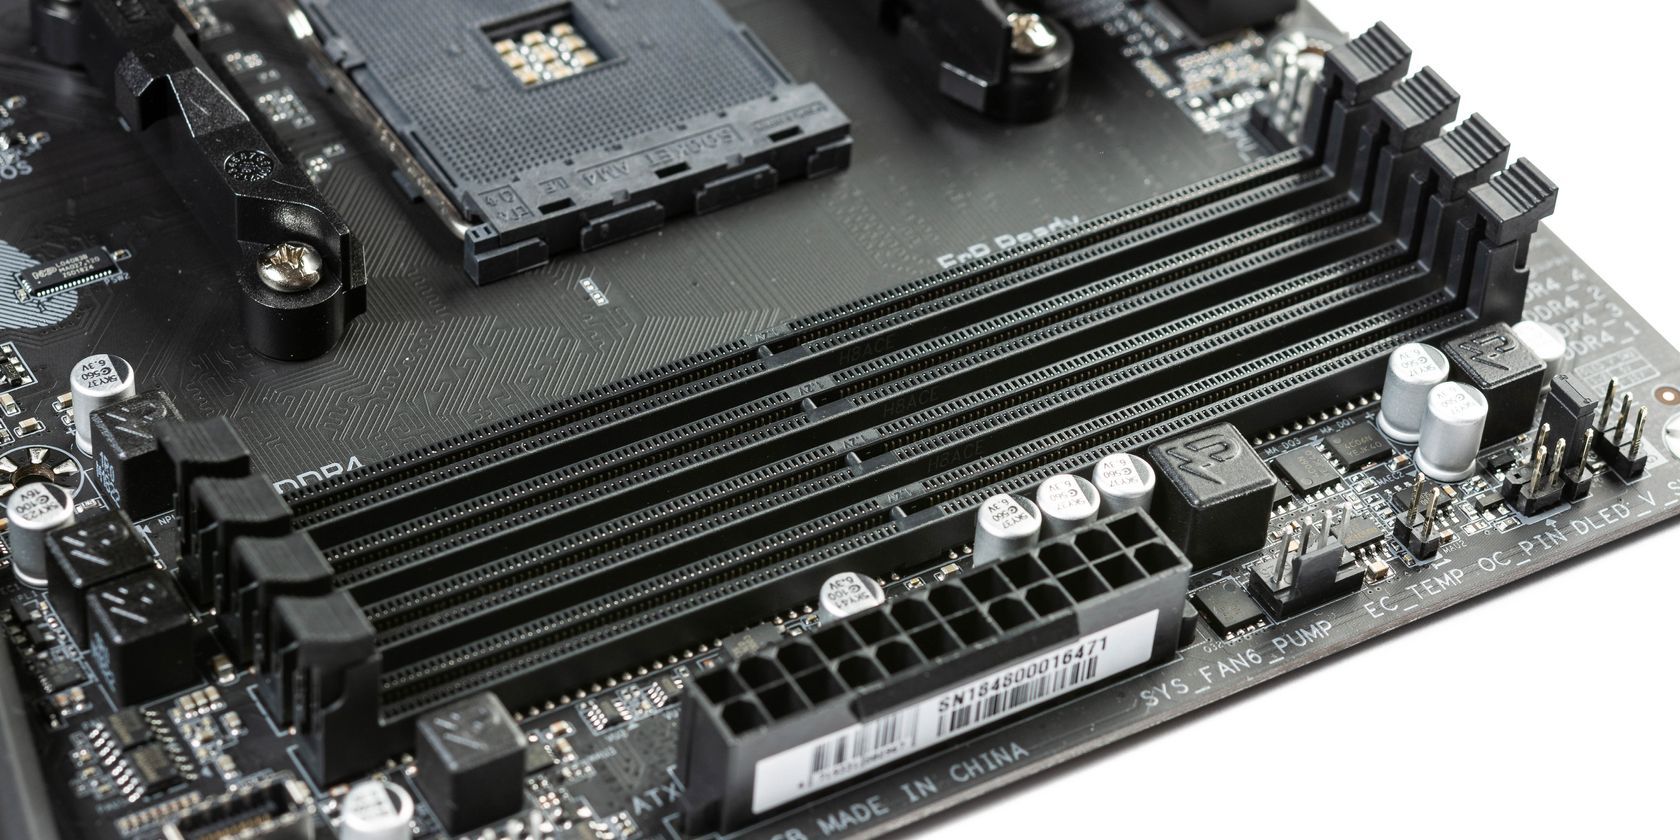 How Do I Find Compatible RAM for a Motherboard?